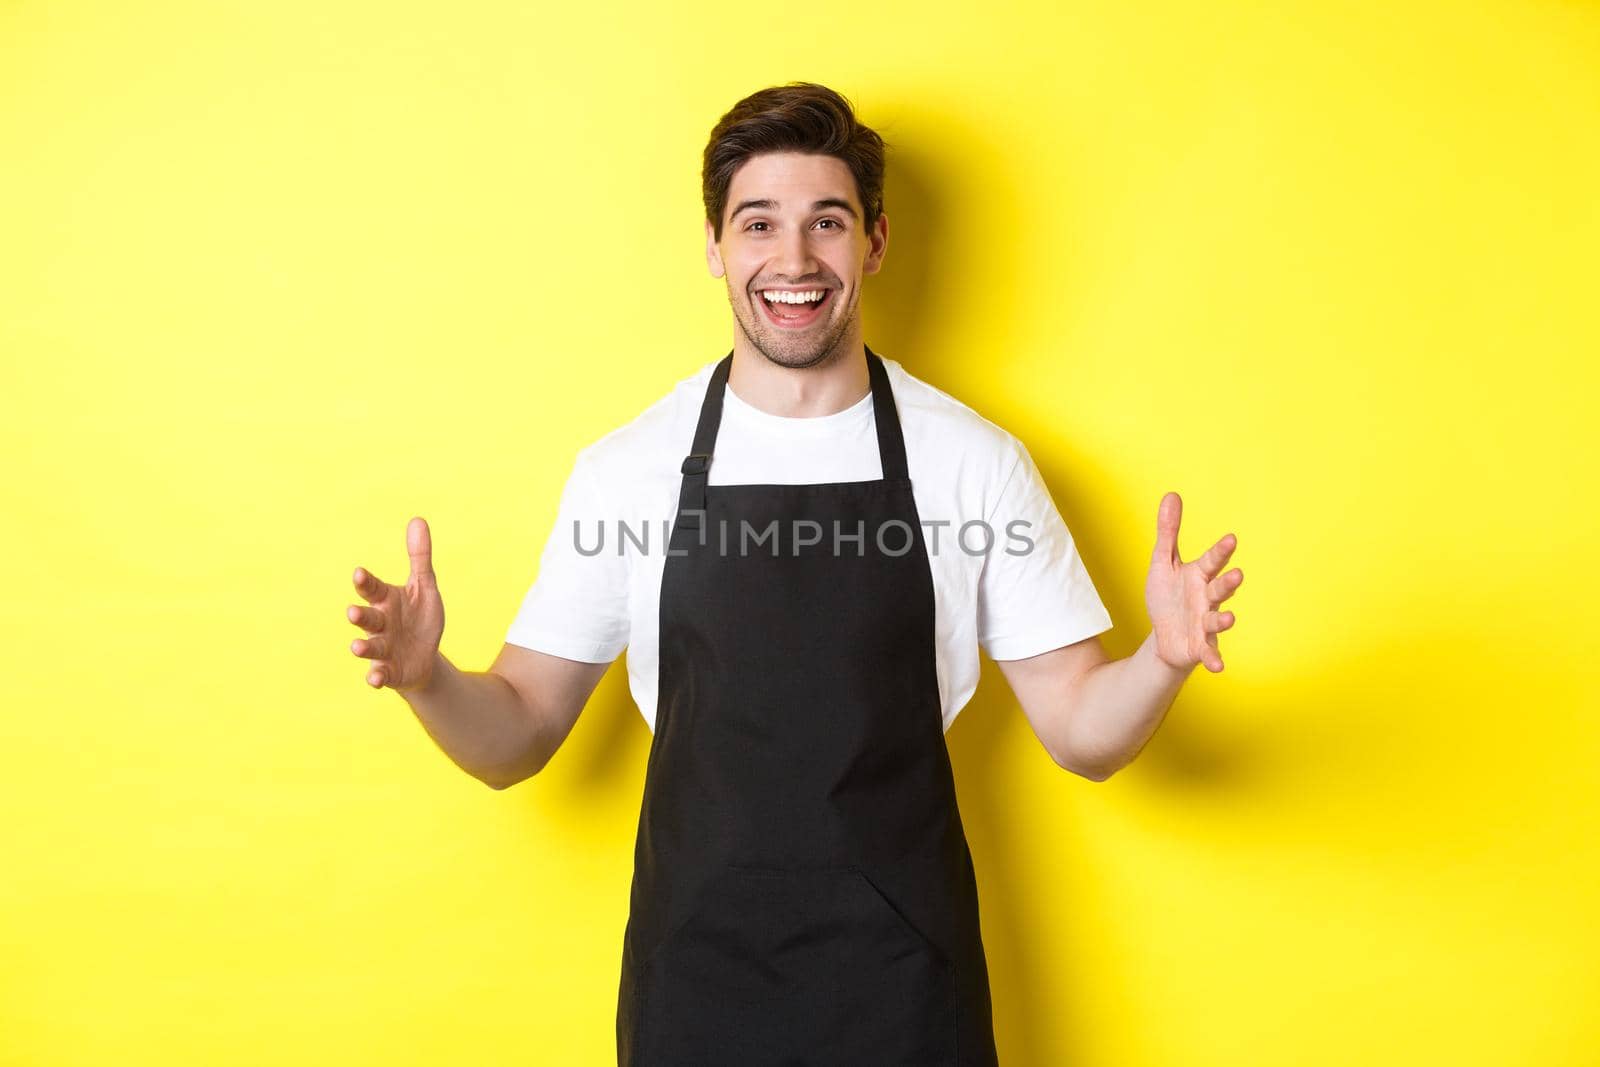 Happy barista holding something big, shaping large object, standing over yellow background.